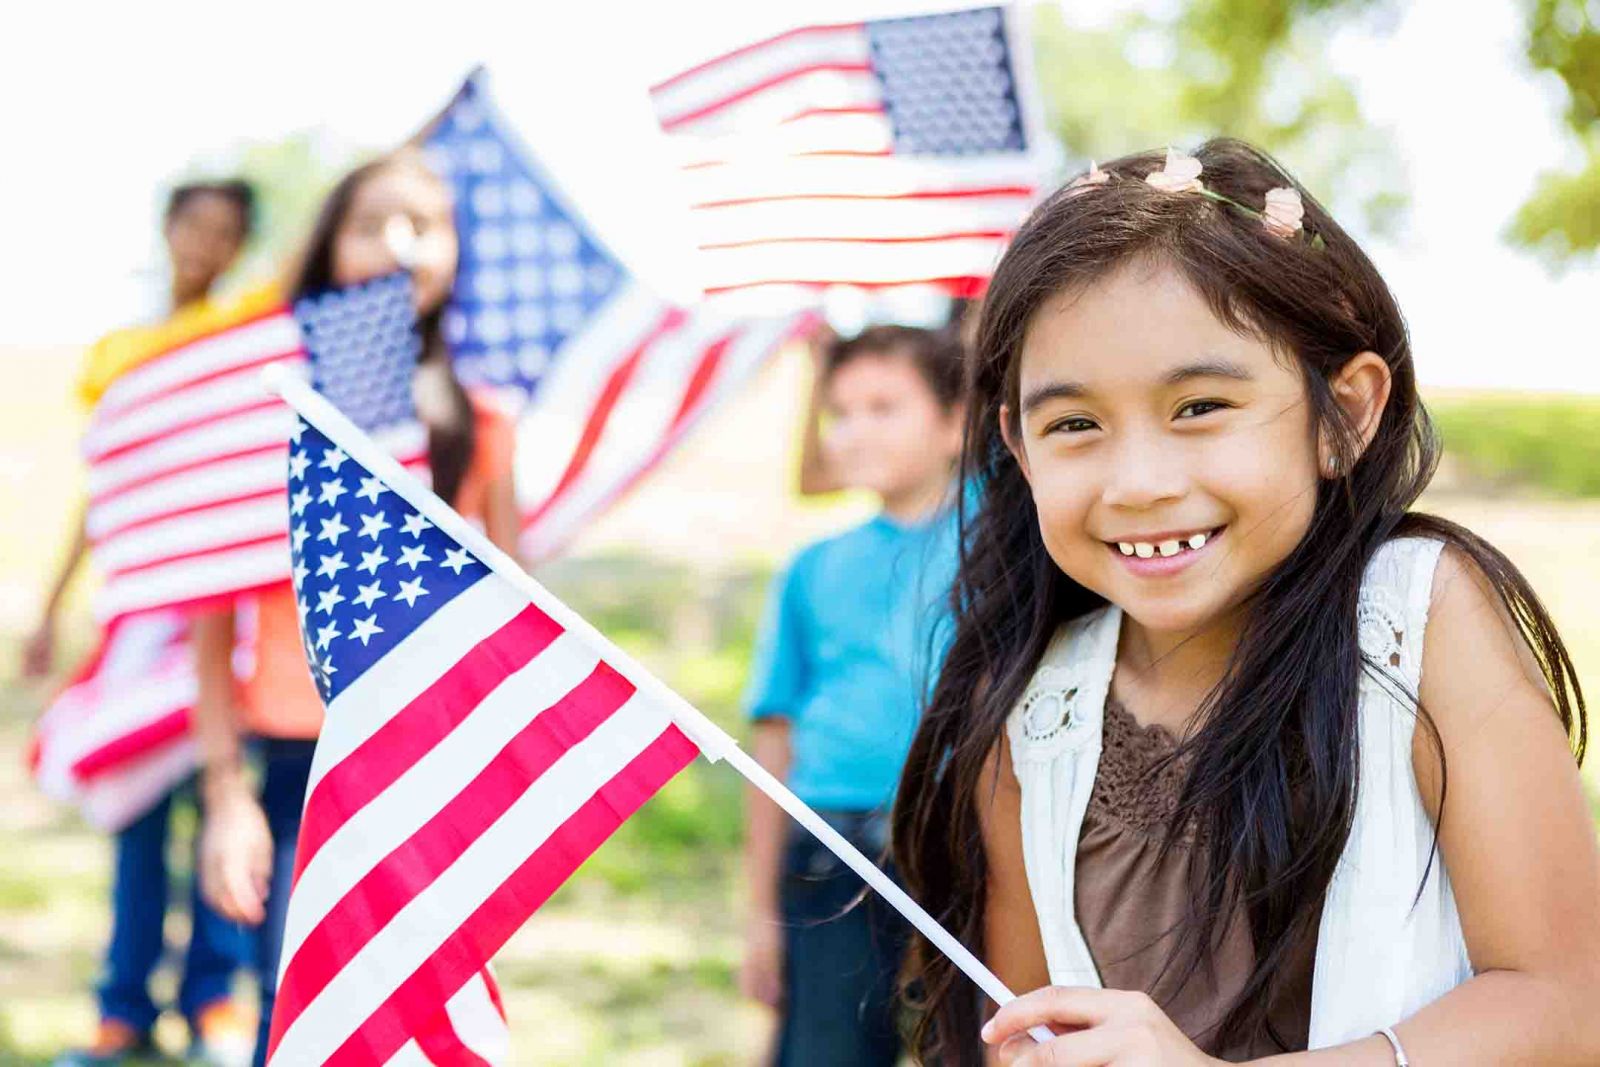 Little girl and her friends playing with American flags